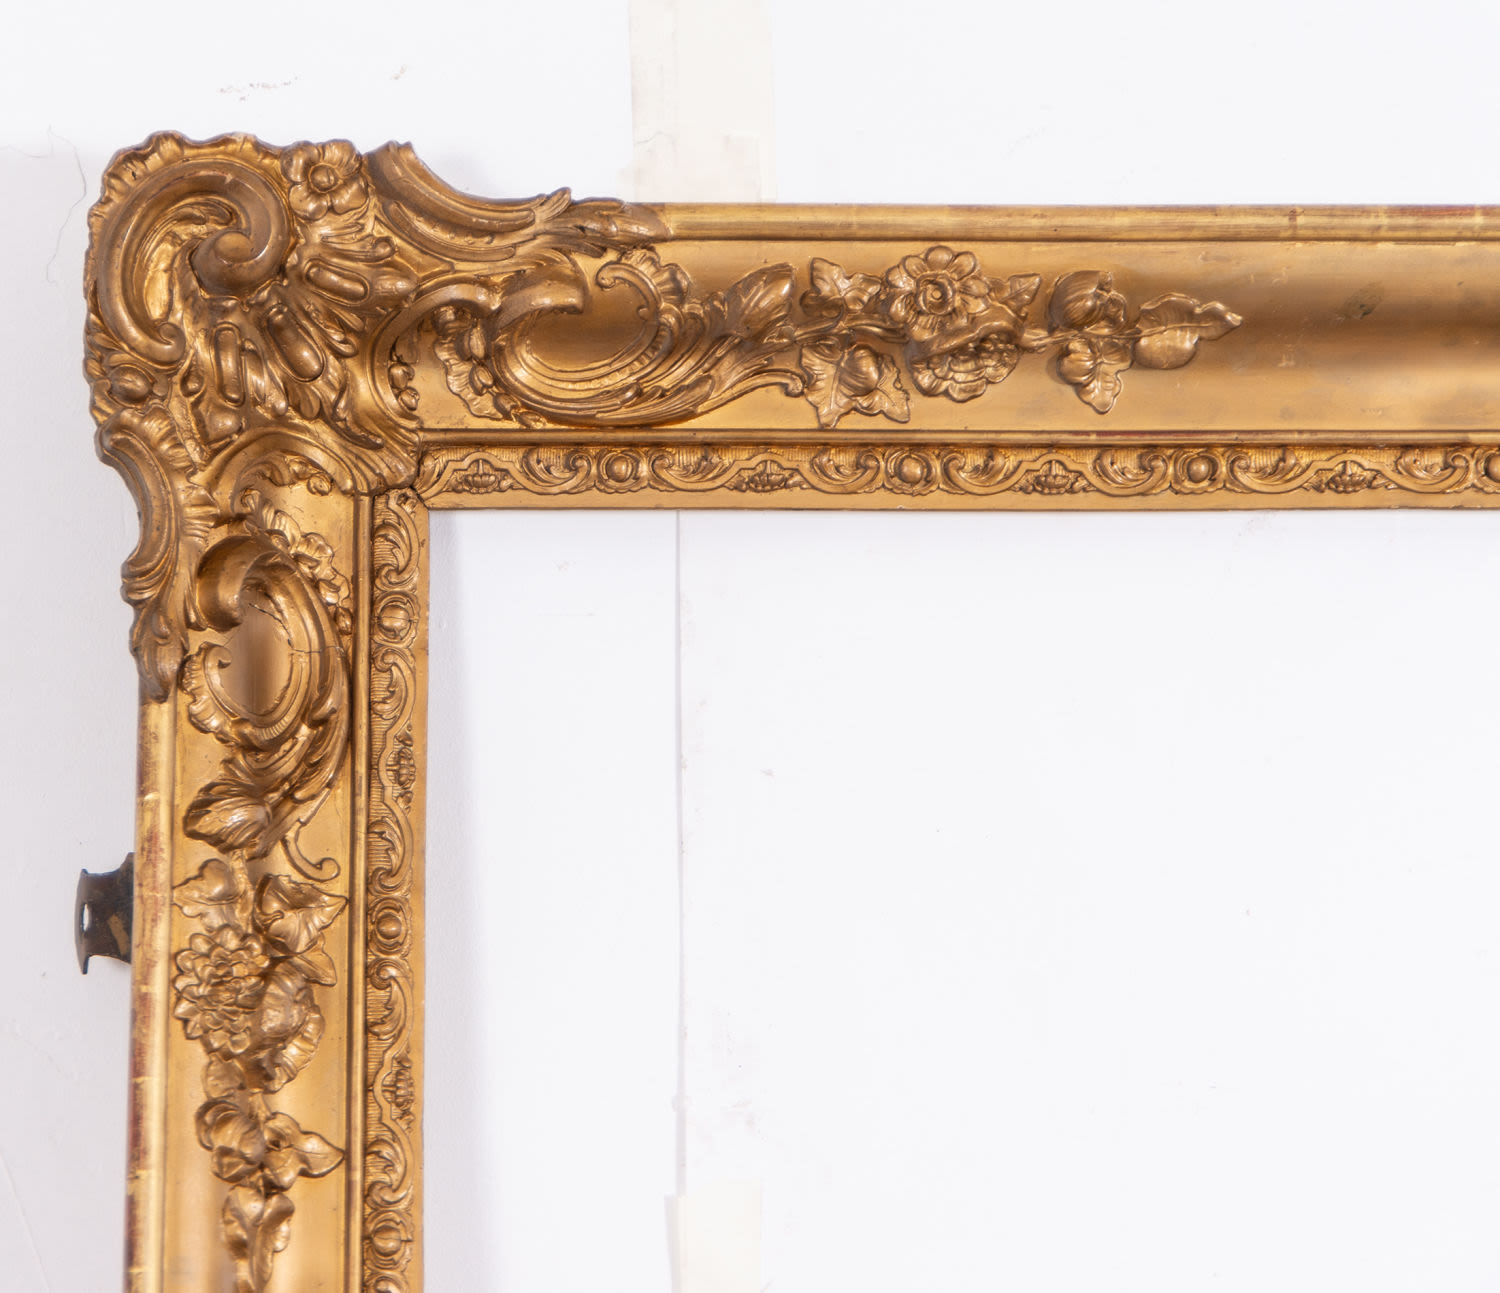 Important French frame in the Louis XVI style, 19th century - Image 4 of 5